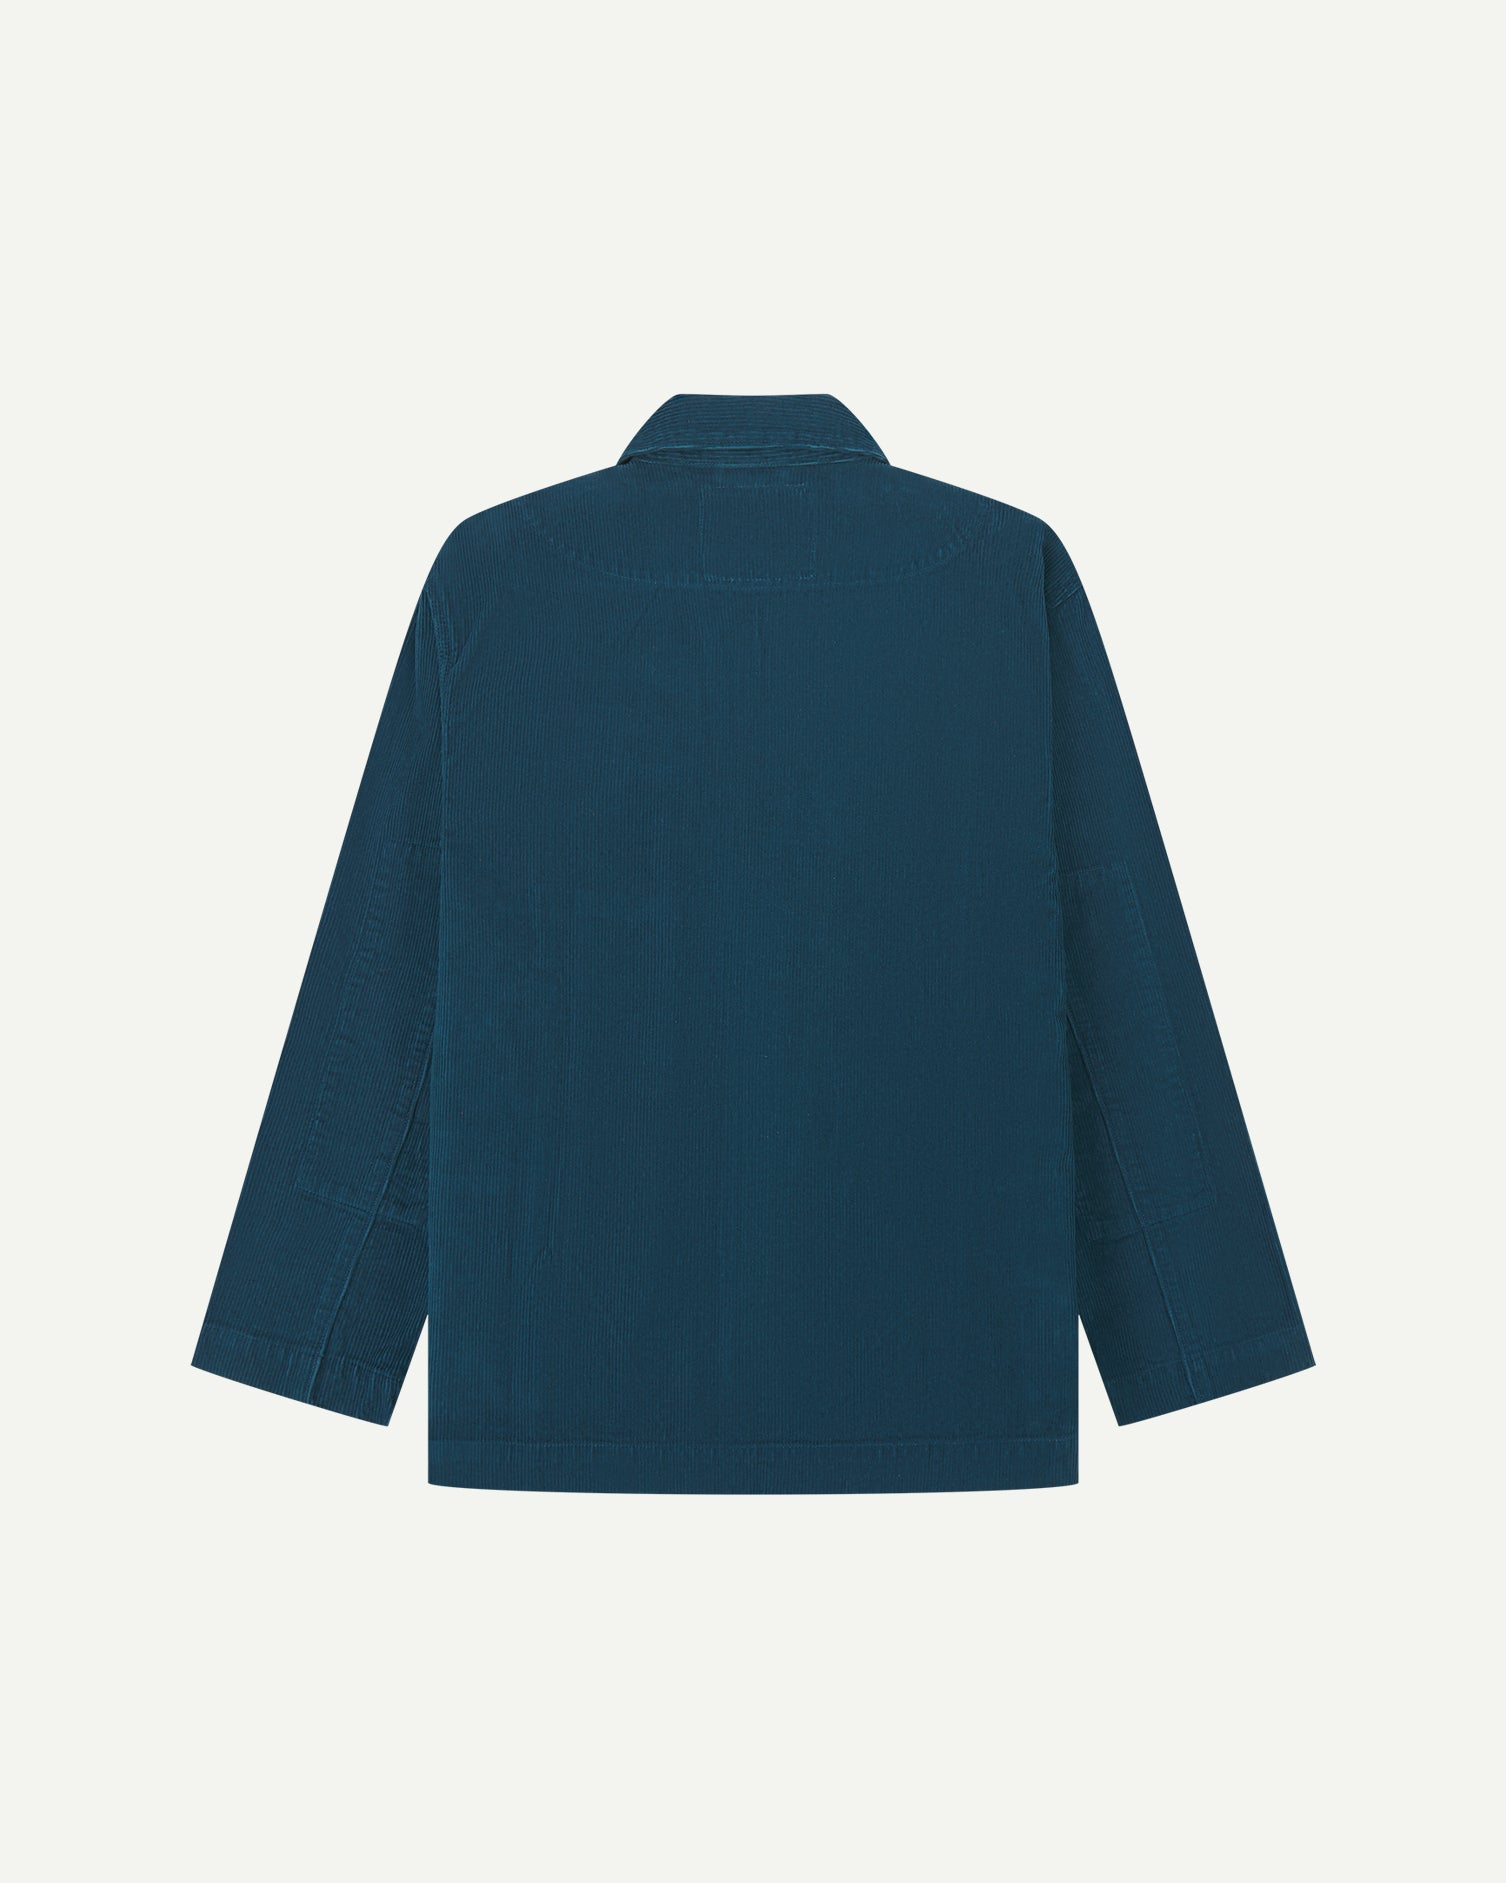  Flat back view of men's corduroy petrol blue blazer from Uskees